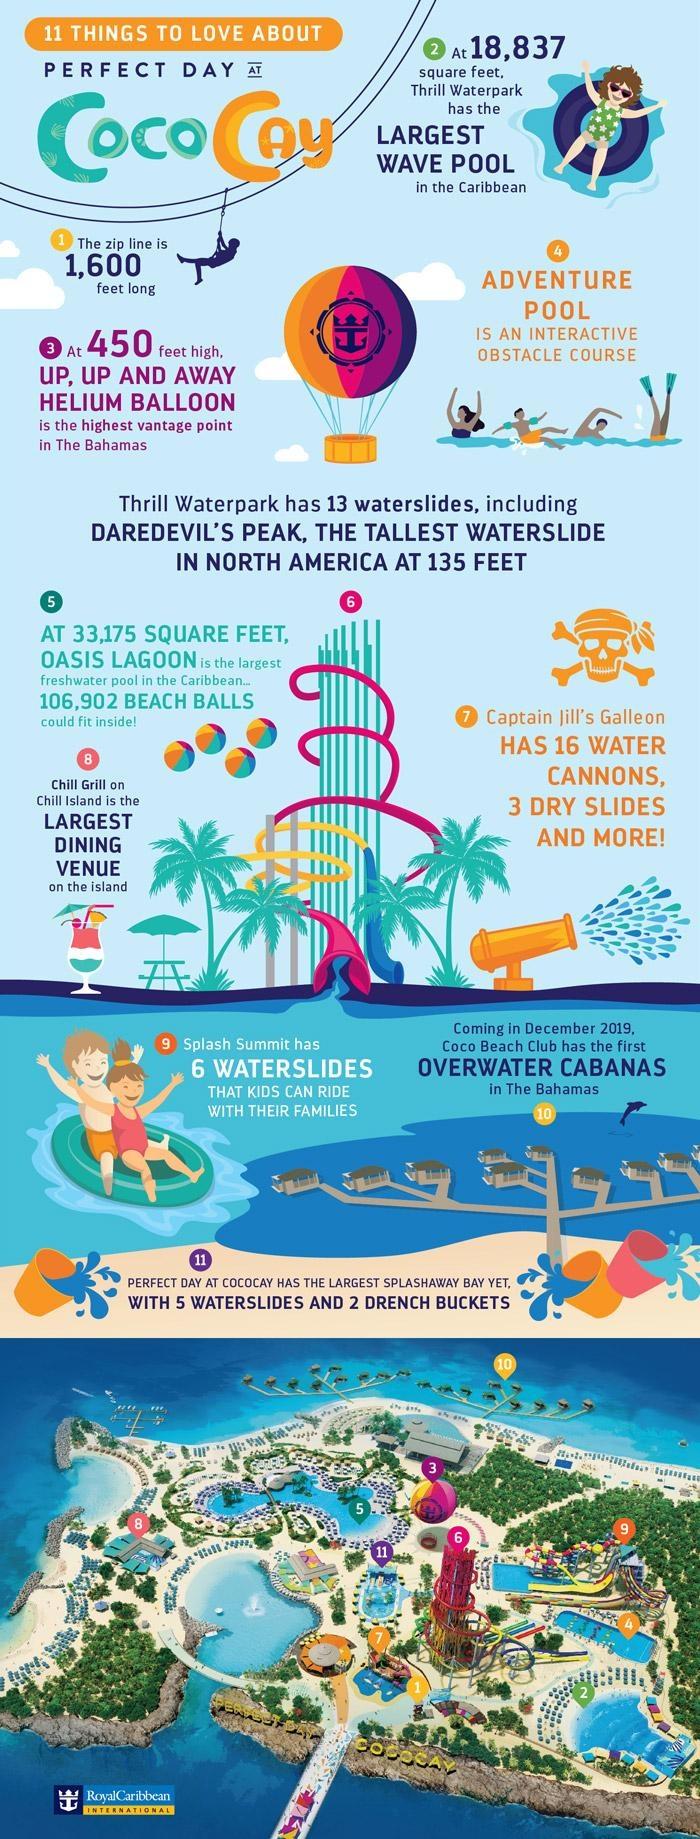 perfect day at cococay infographic royal caribbean private island